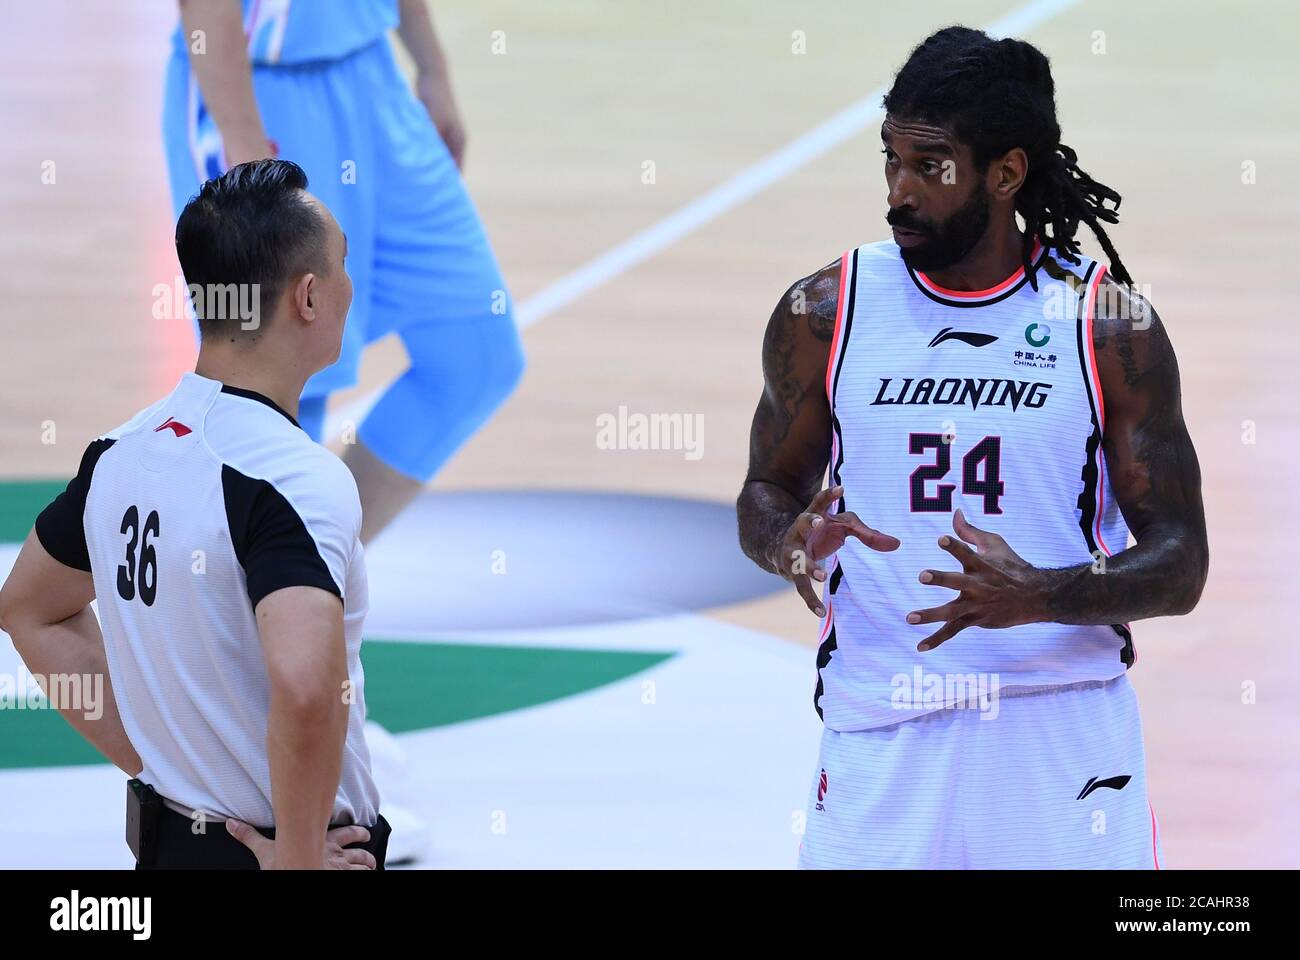 (200807) -- QINGDAO, Aug. 7, 2020 (Xinhua) -- O.J. Mayo (R) of Liaoning Flying Leopards reacts during the semifinal match between Liaoning Flying Leopards and Xinjiang Flying Tigers at the 2019-2020 Chinese Basketball Association (CBA) league in Qingdao, east China's Shandong Province, Aug. 7, 2020. (Xinhua/Zhu Zheng) Stock Photo